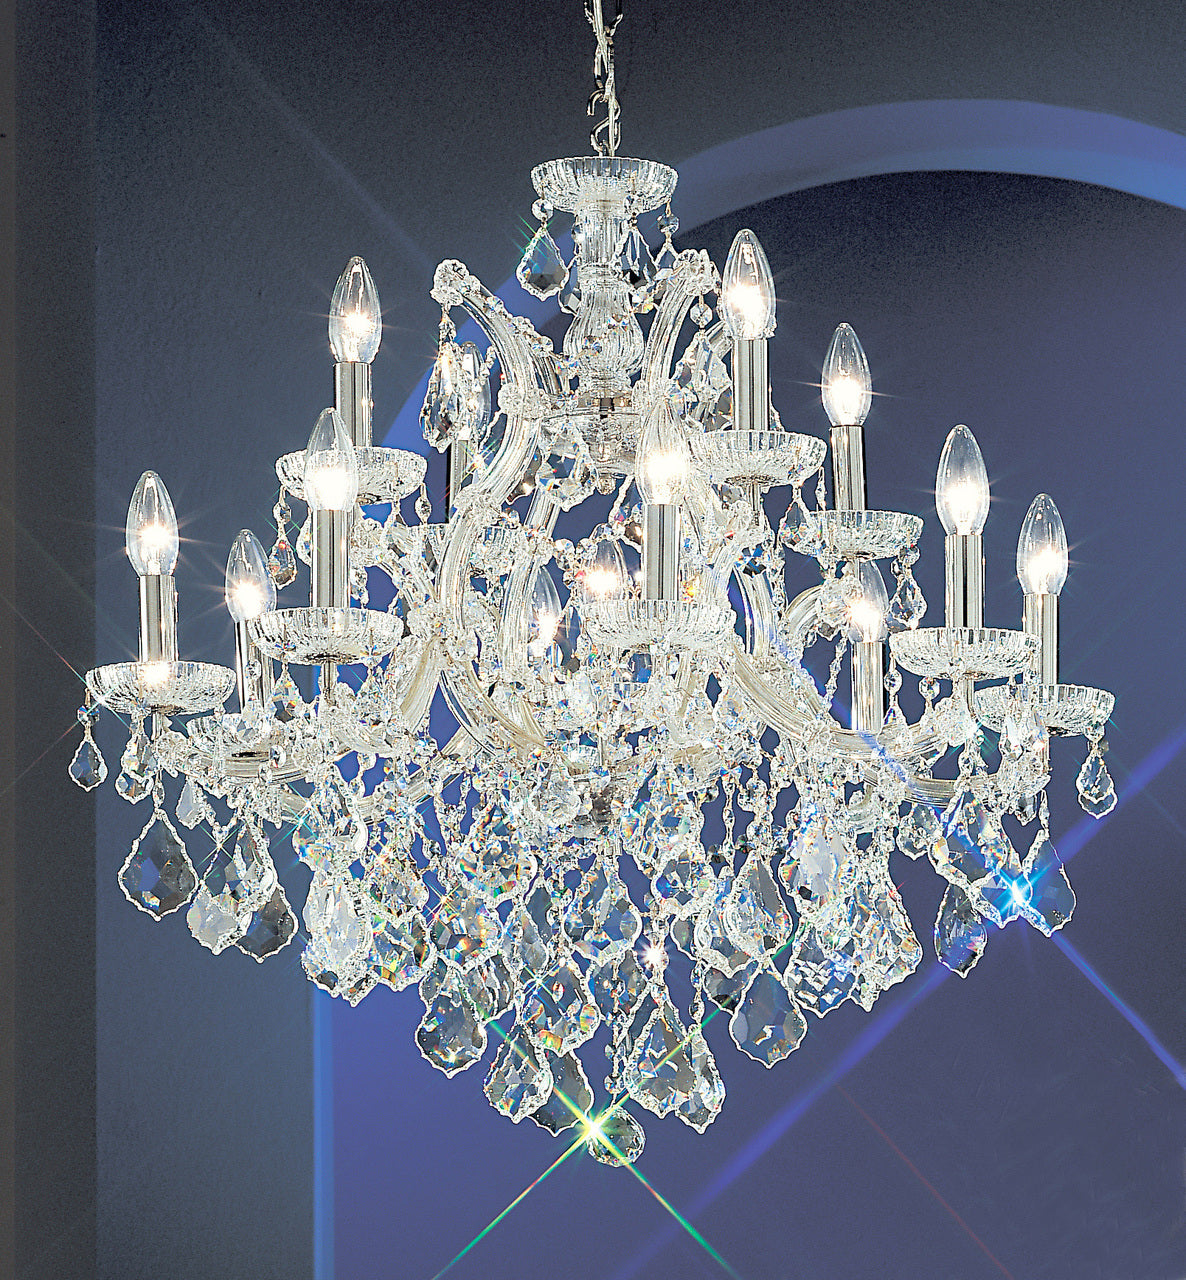 Classic Lighting 8133 OWG C Maria Theresa Traditional Crystal Chandelier in Olde World Gold (Imported from Italy)